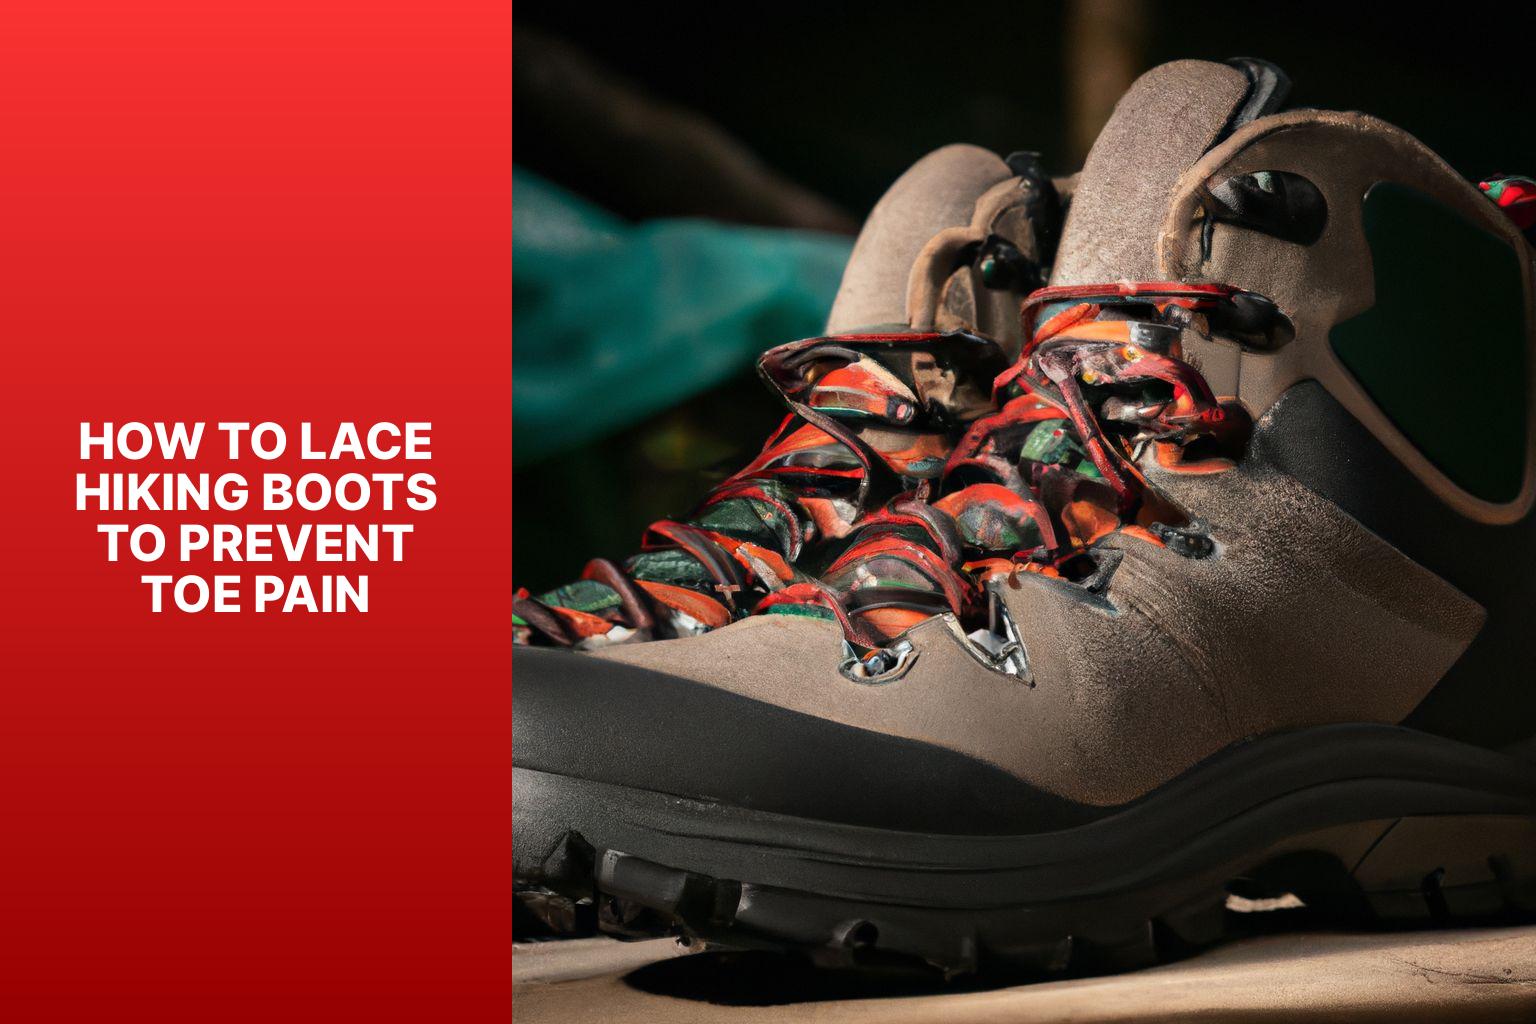 how to lace hiking boots to prevent toe paintrzw